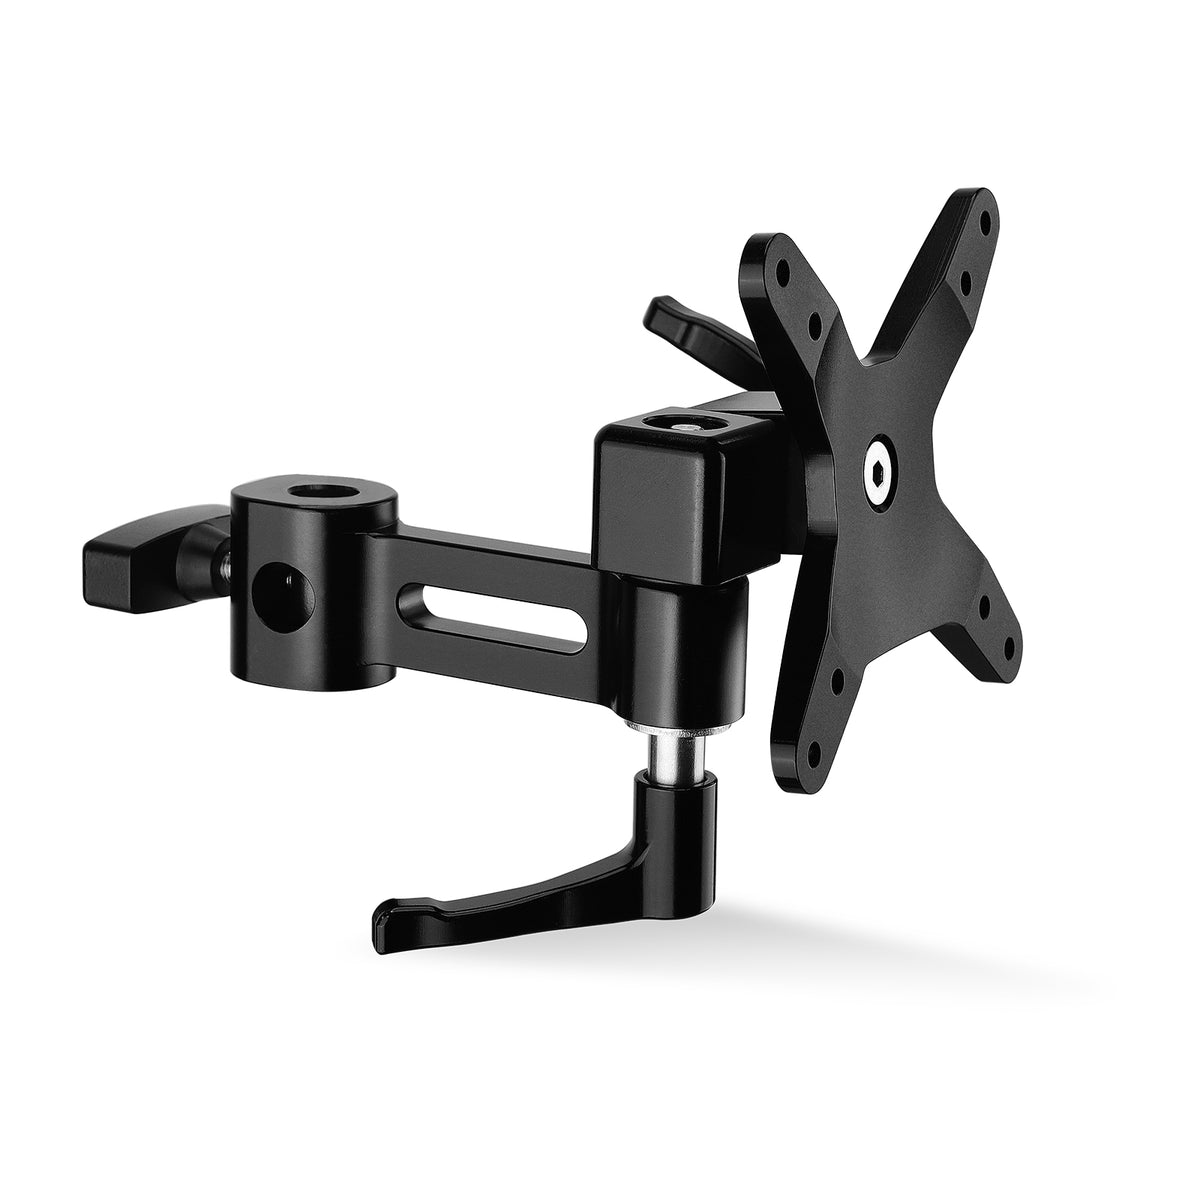 Proaim Monitor Mount for C-Stands & Light Stands